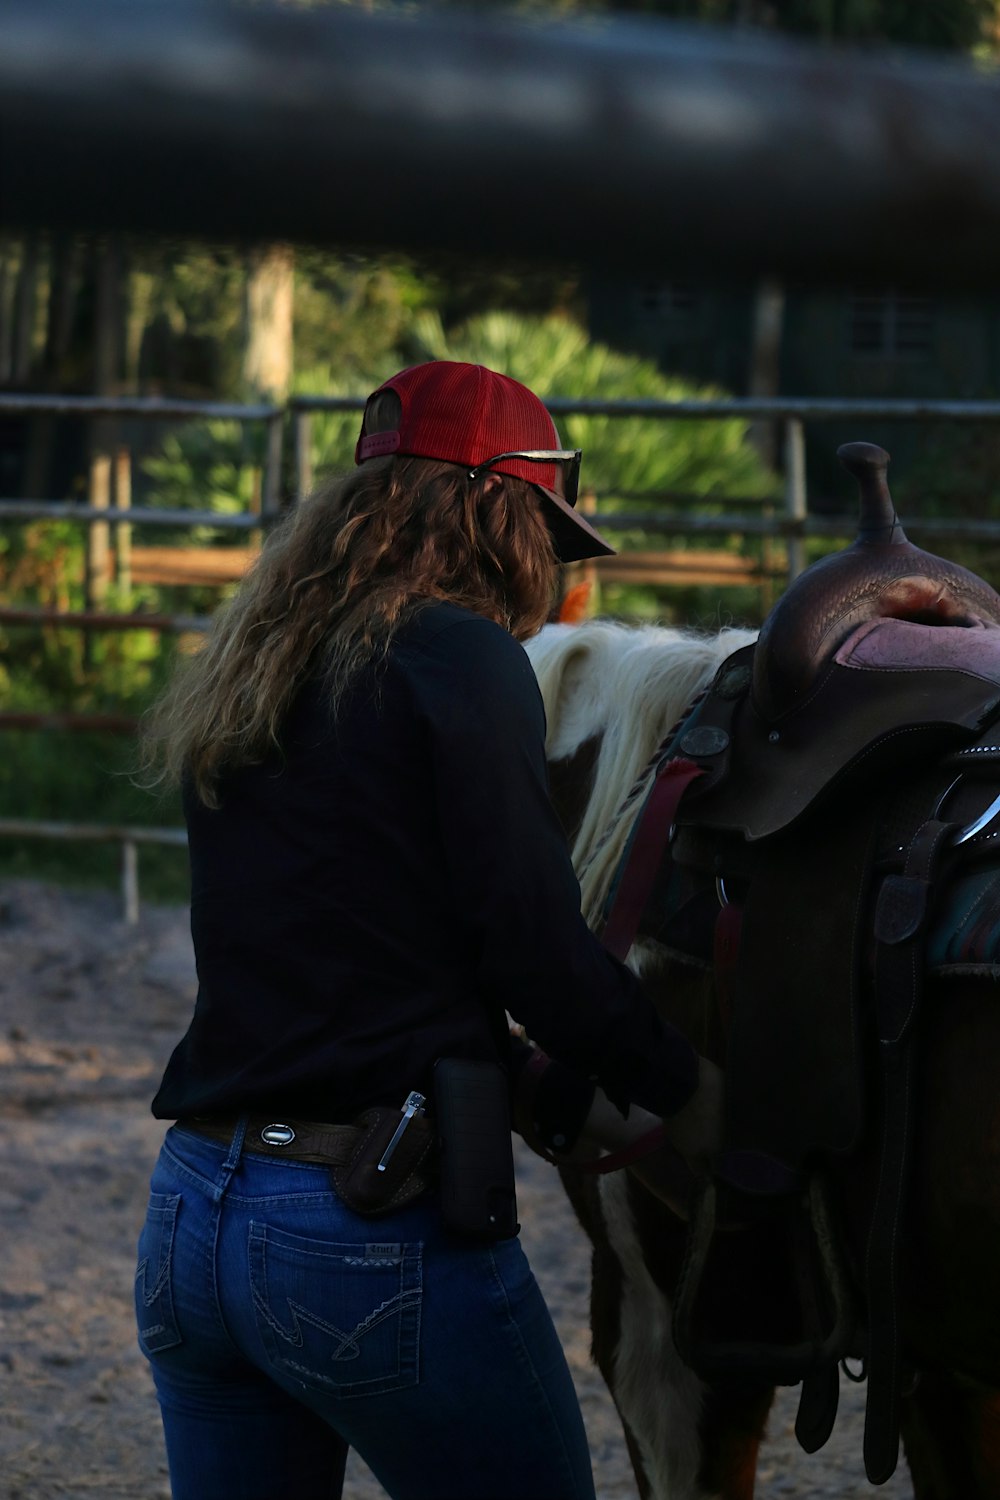 a woman wearing a red hat standing next to a horse